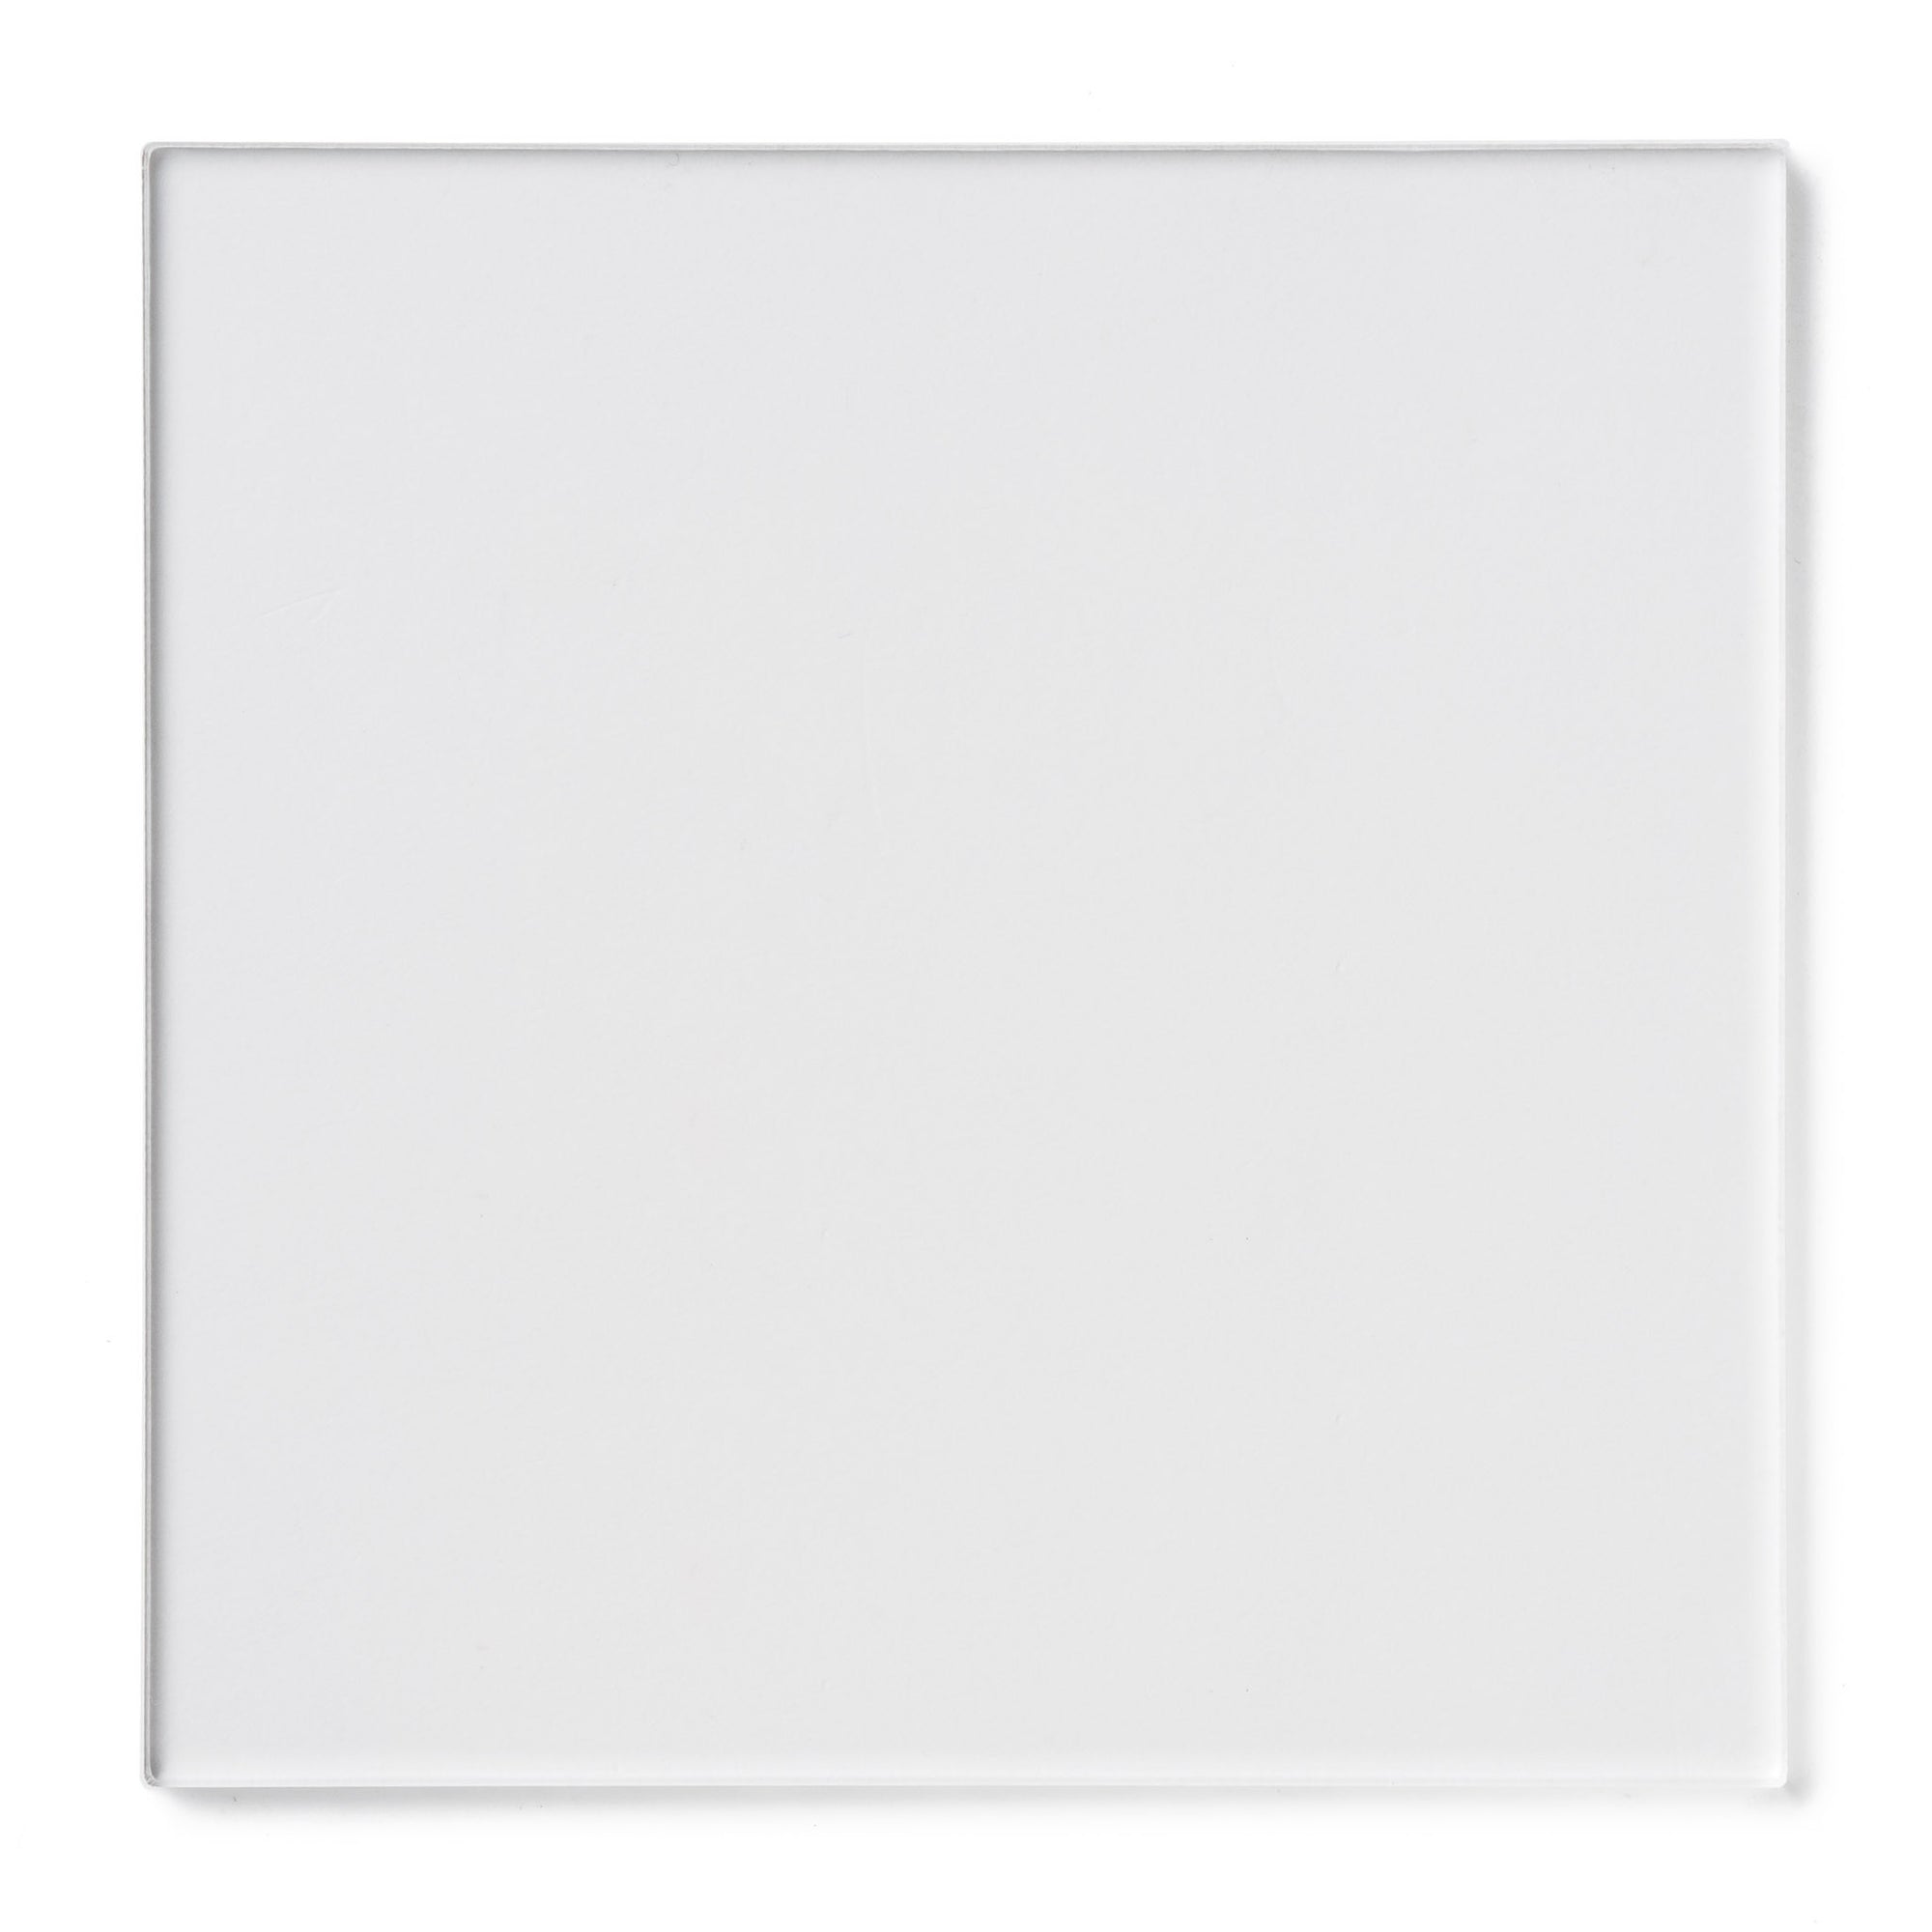 Clear Colorless 0.040" Acrylic Plexiglass Sheet, Swatch view